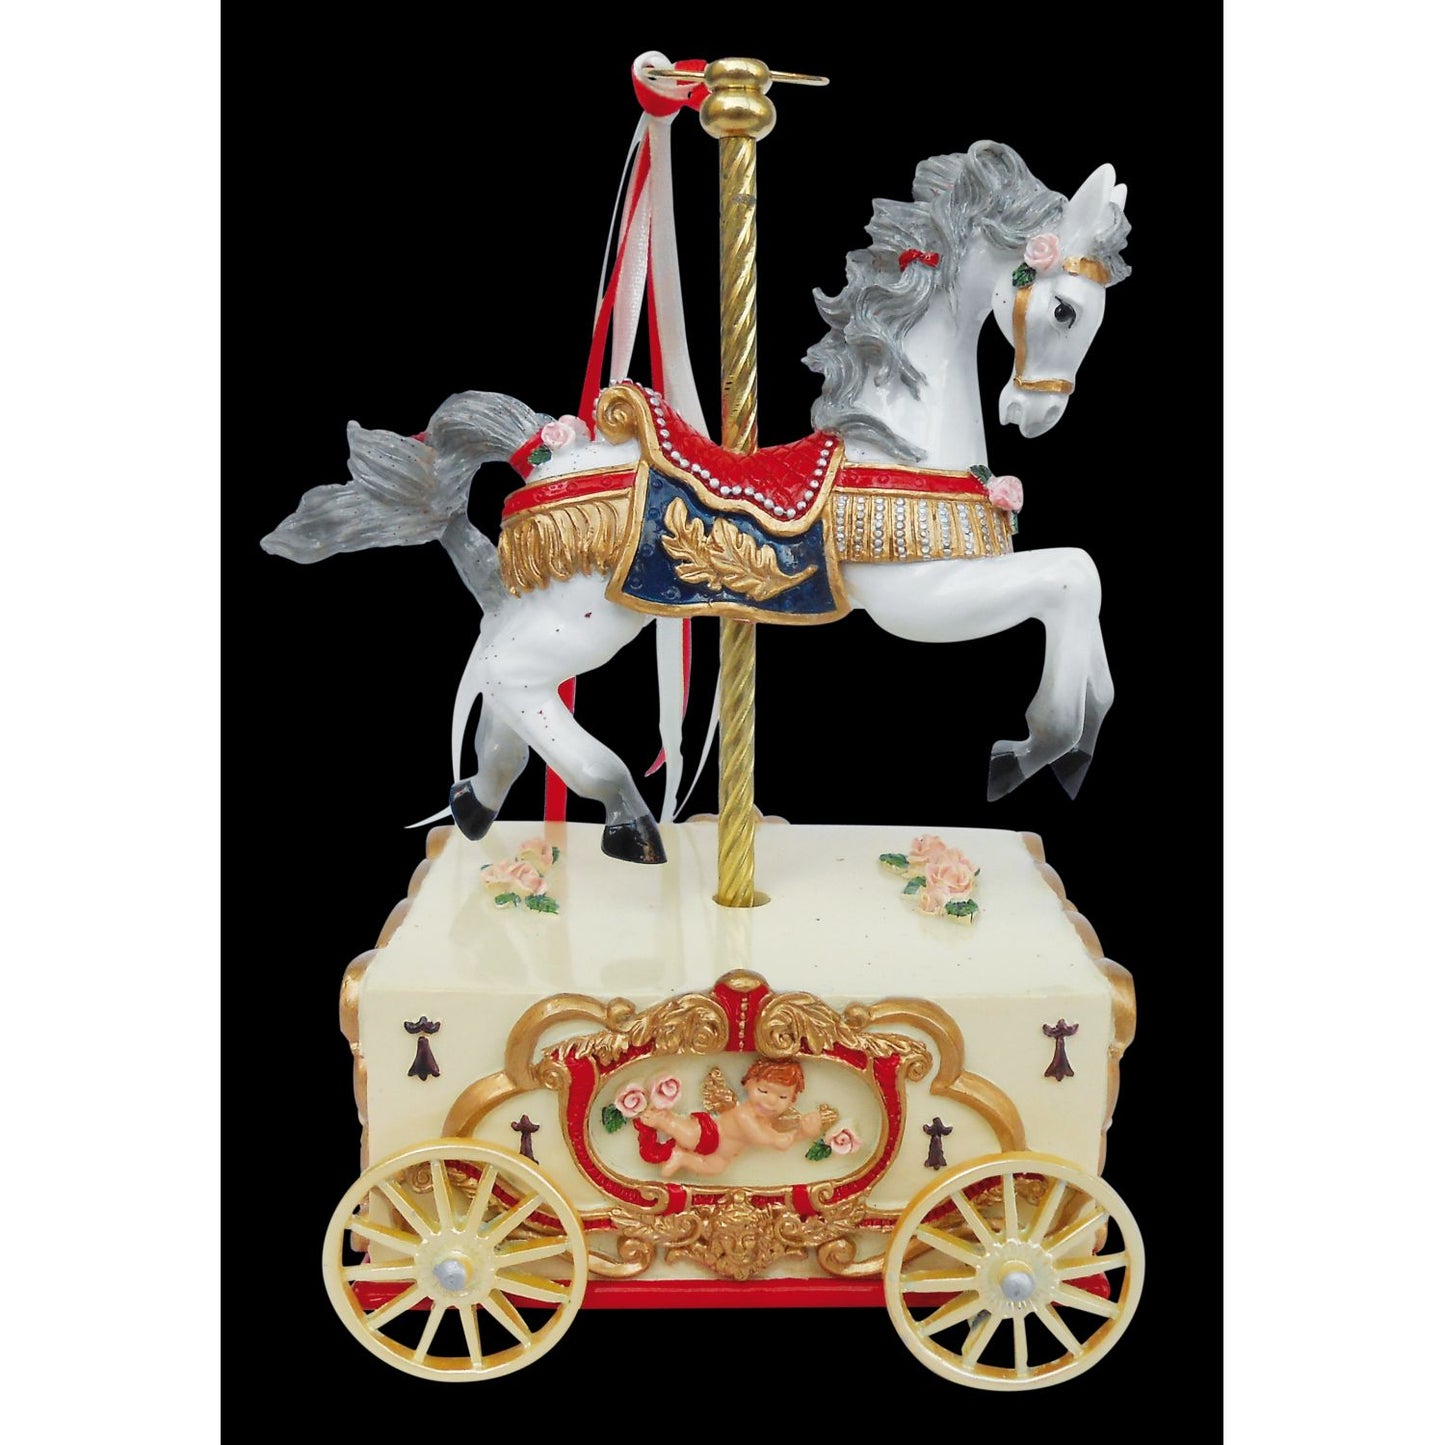 Musicbox Kingdom 6.1" Carousel Horse On A Cart Turns To A Famous Melody